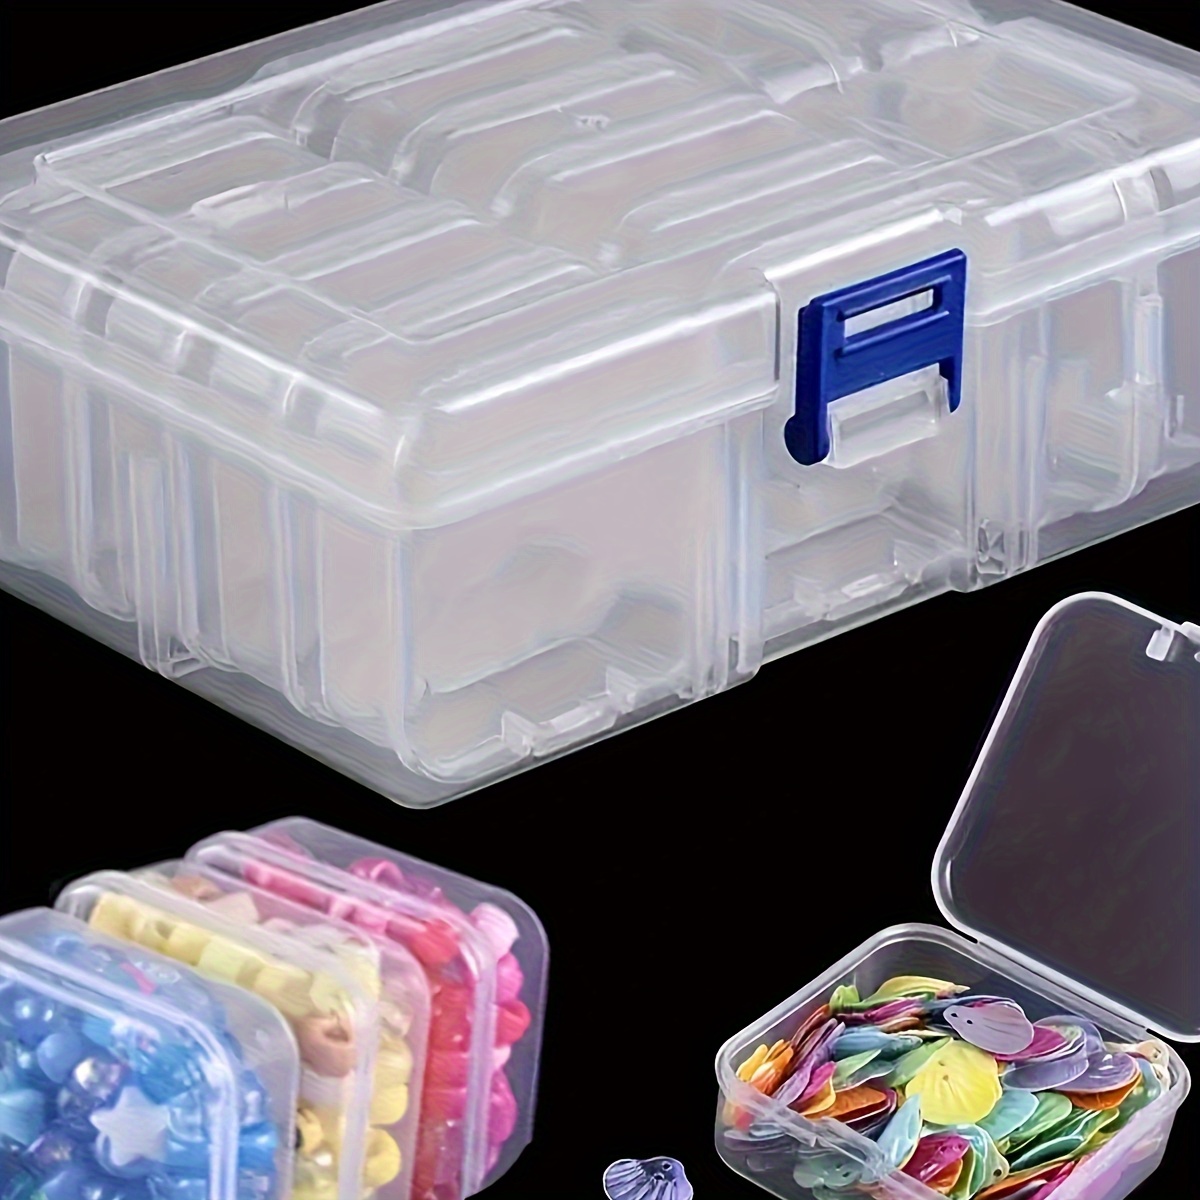 

14pcs Multipurpose Transparent Plastic Storage Box, Diy Diamond Painting Toolbox, Craft Jewelry Accessories Organizer, Bead Sorting Case Container, With Secure Snap Closure